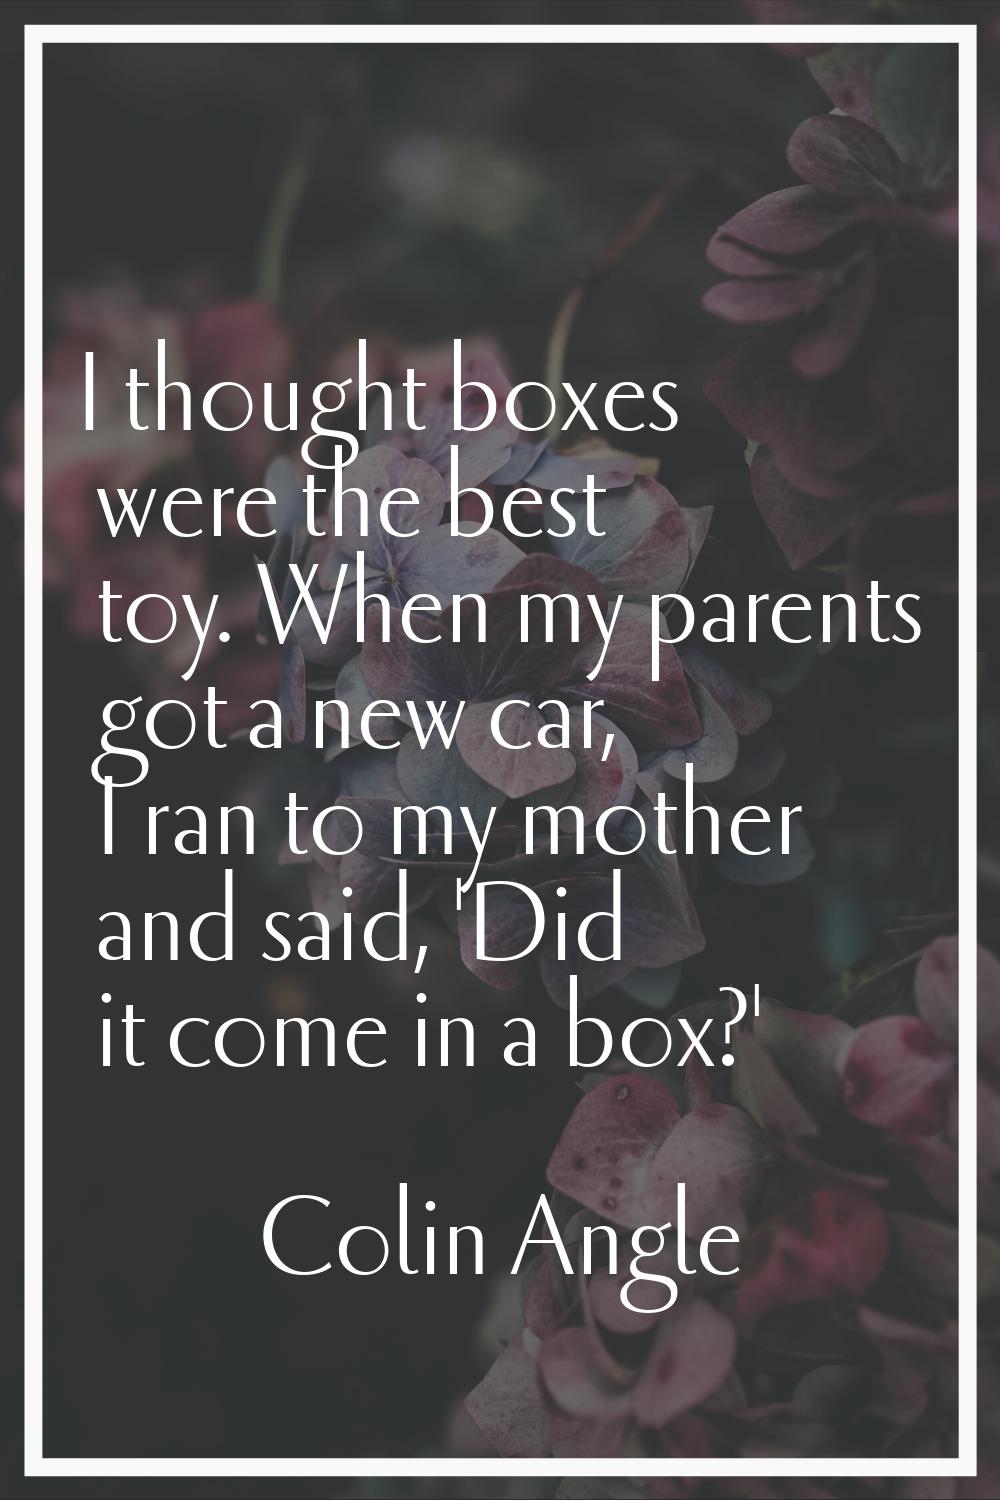 I thought boxes were the best toy. When my parents got a new car, I ran to my mother and said, 'Did